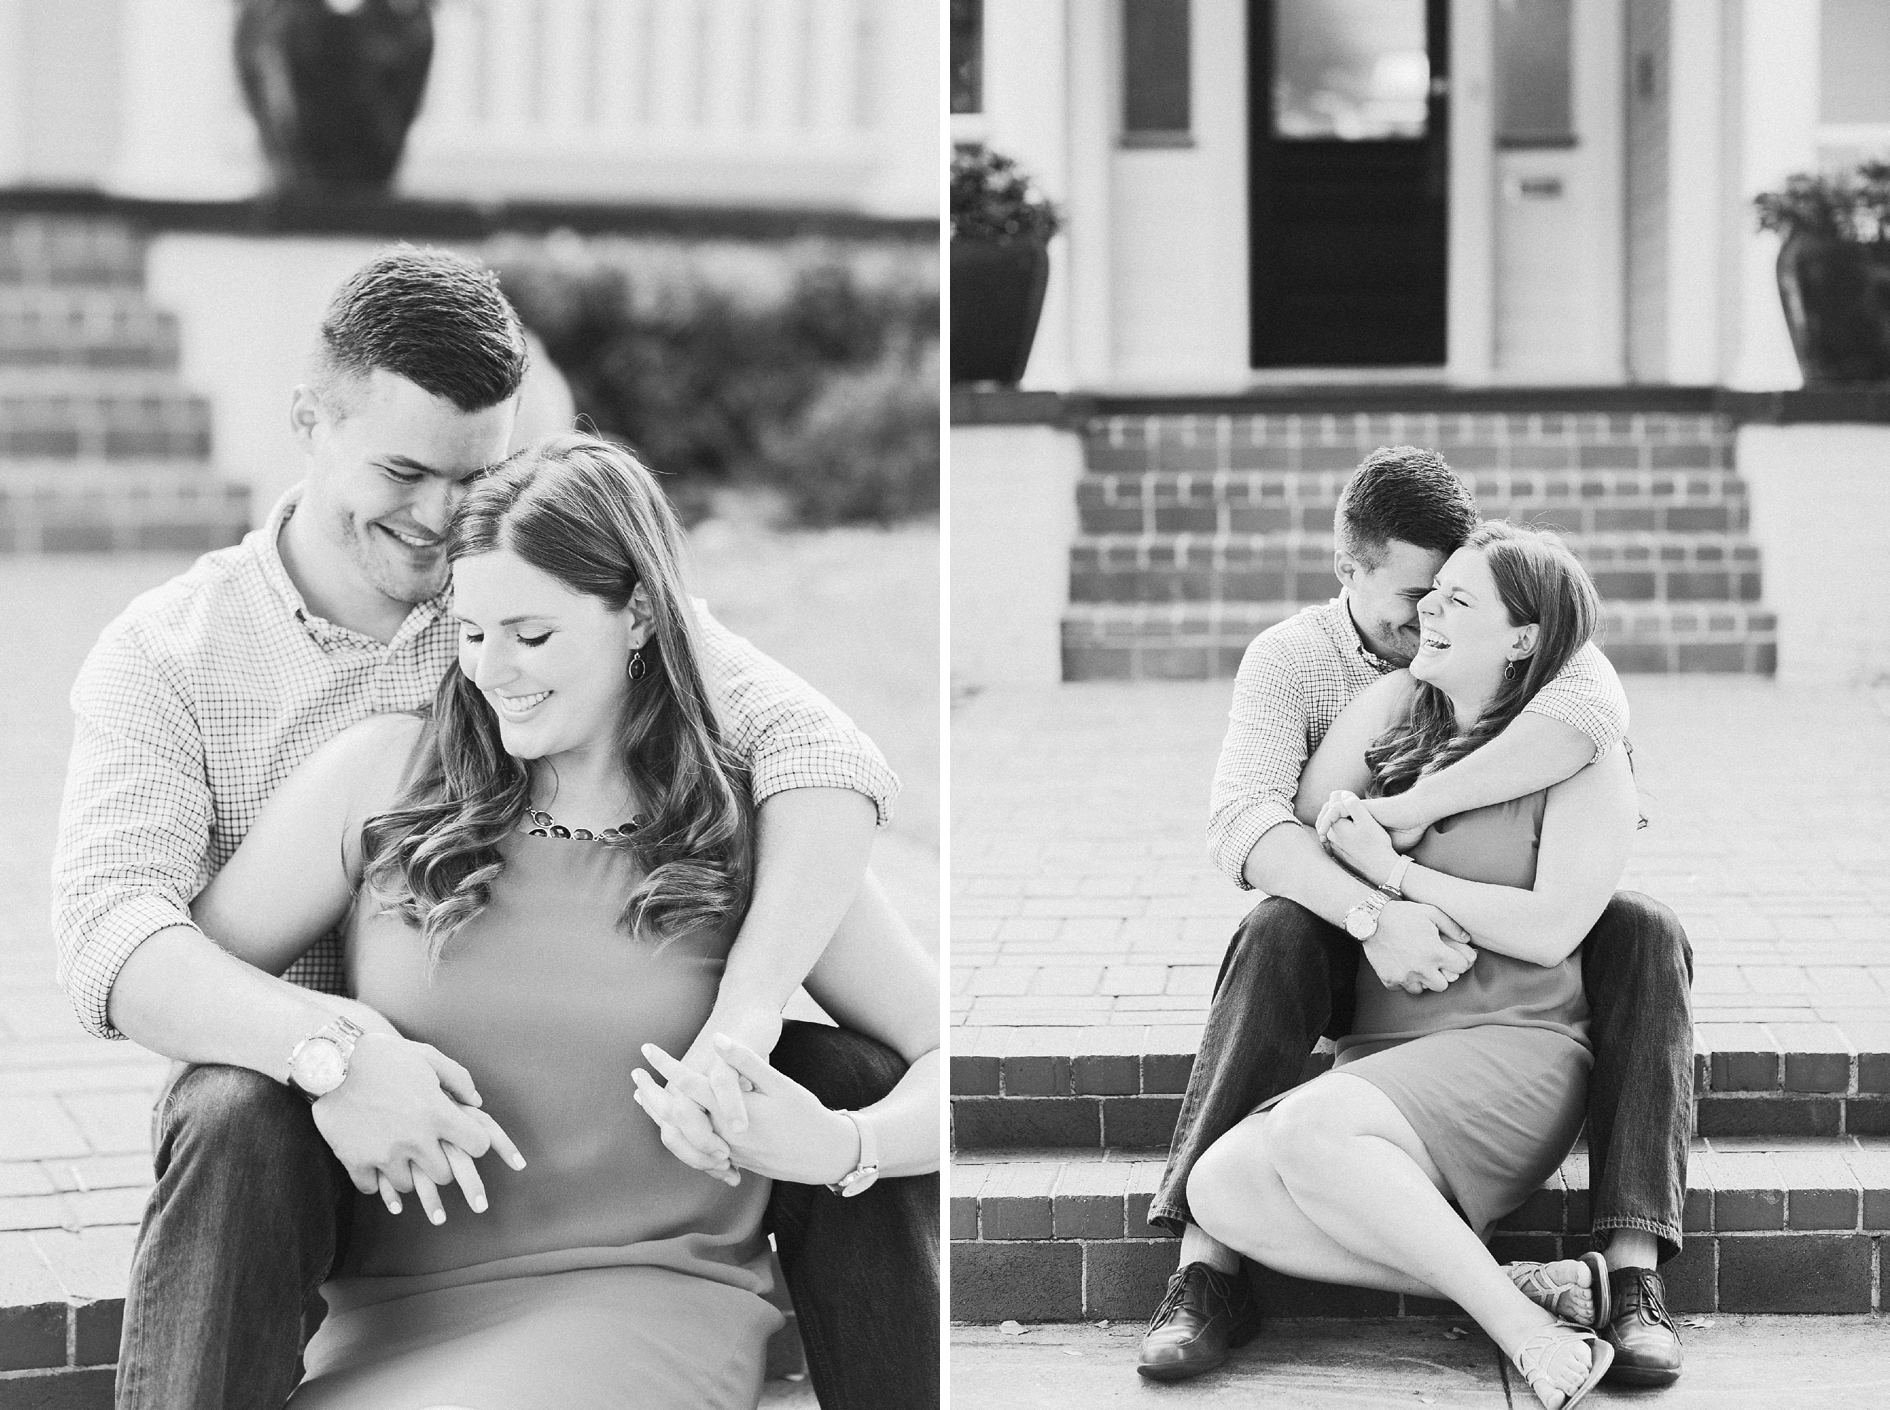 South Tampa Engagement | © Ailyn La Torre Photography 2016